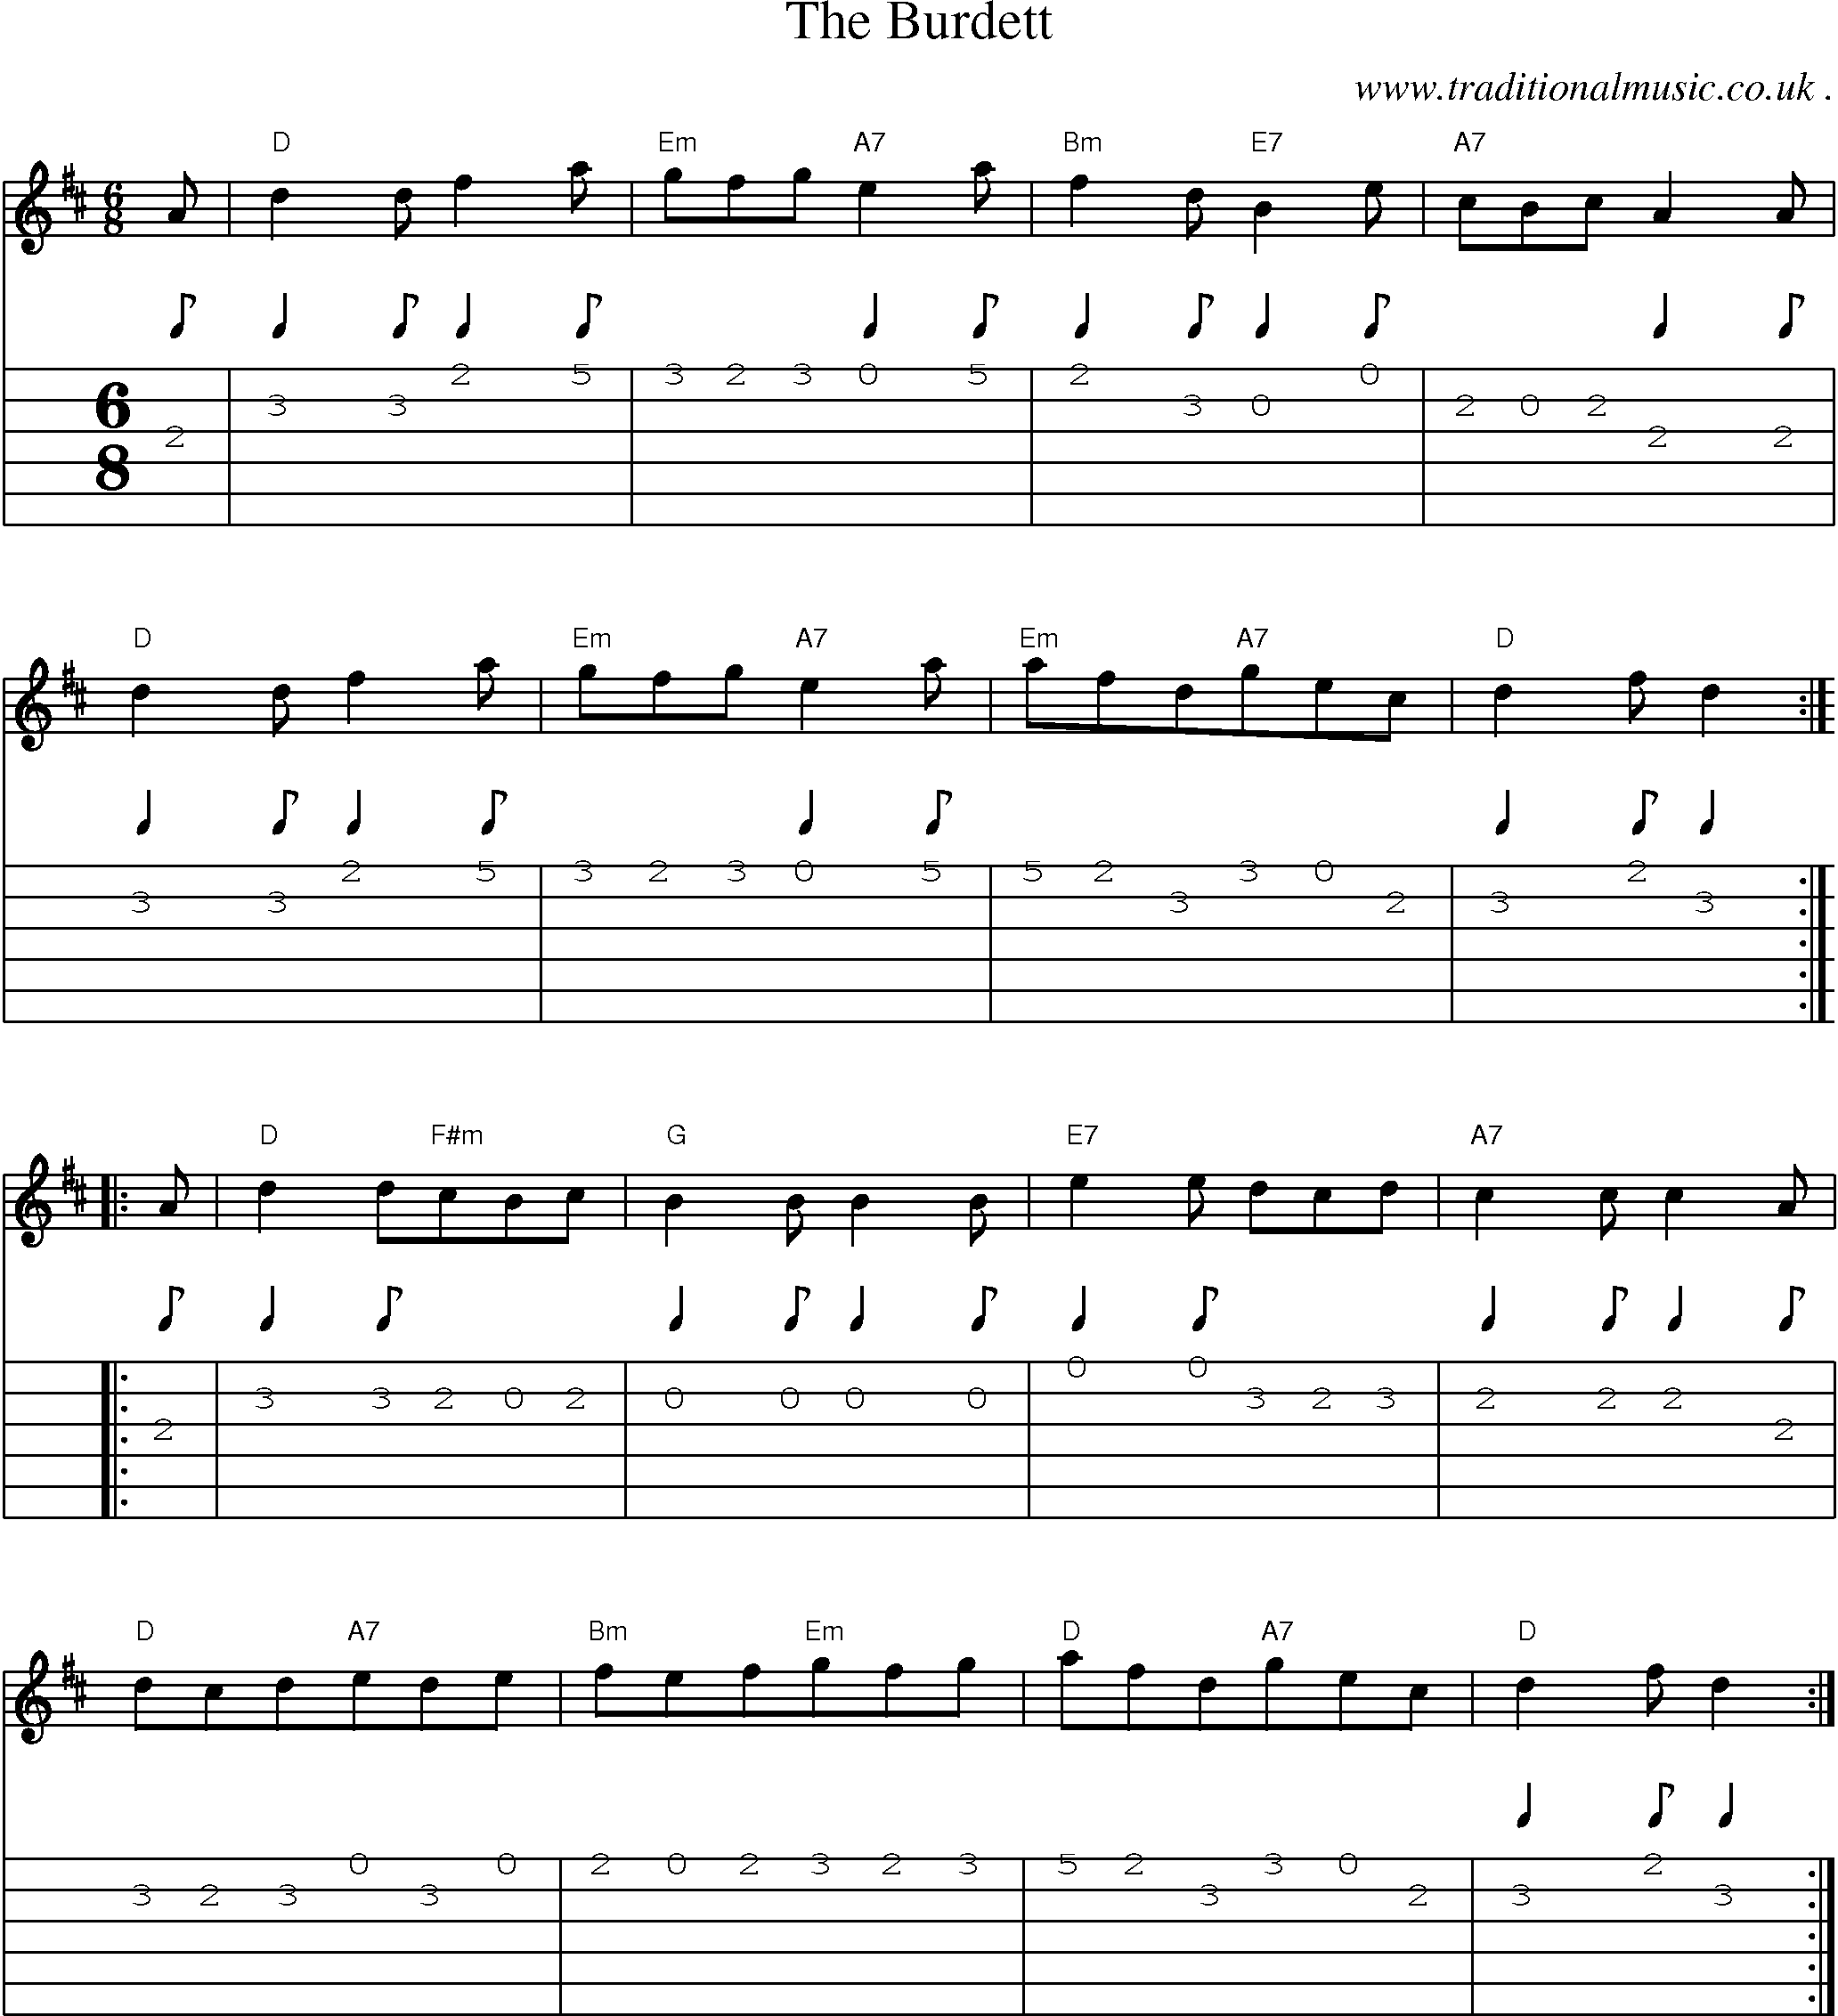 Sheet-Music and Guitar Tabs for The Burdett